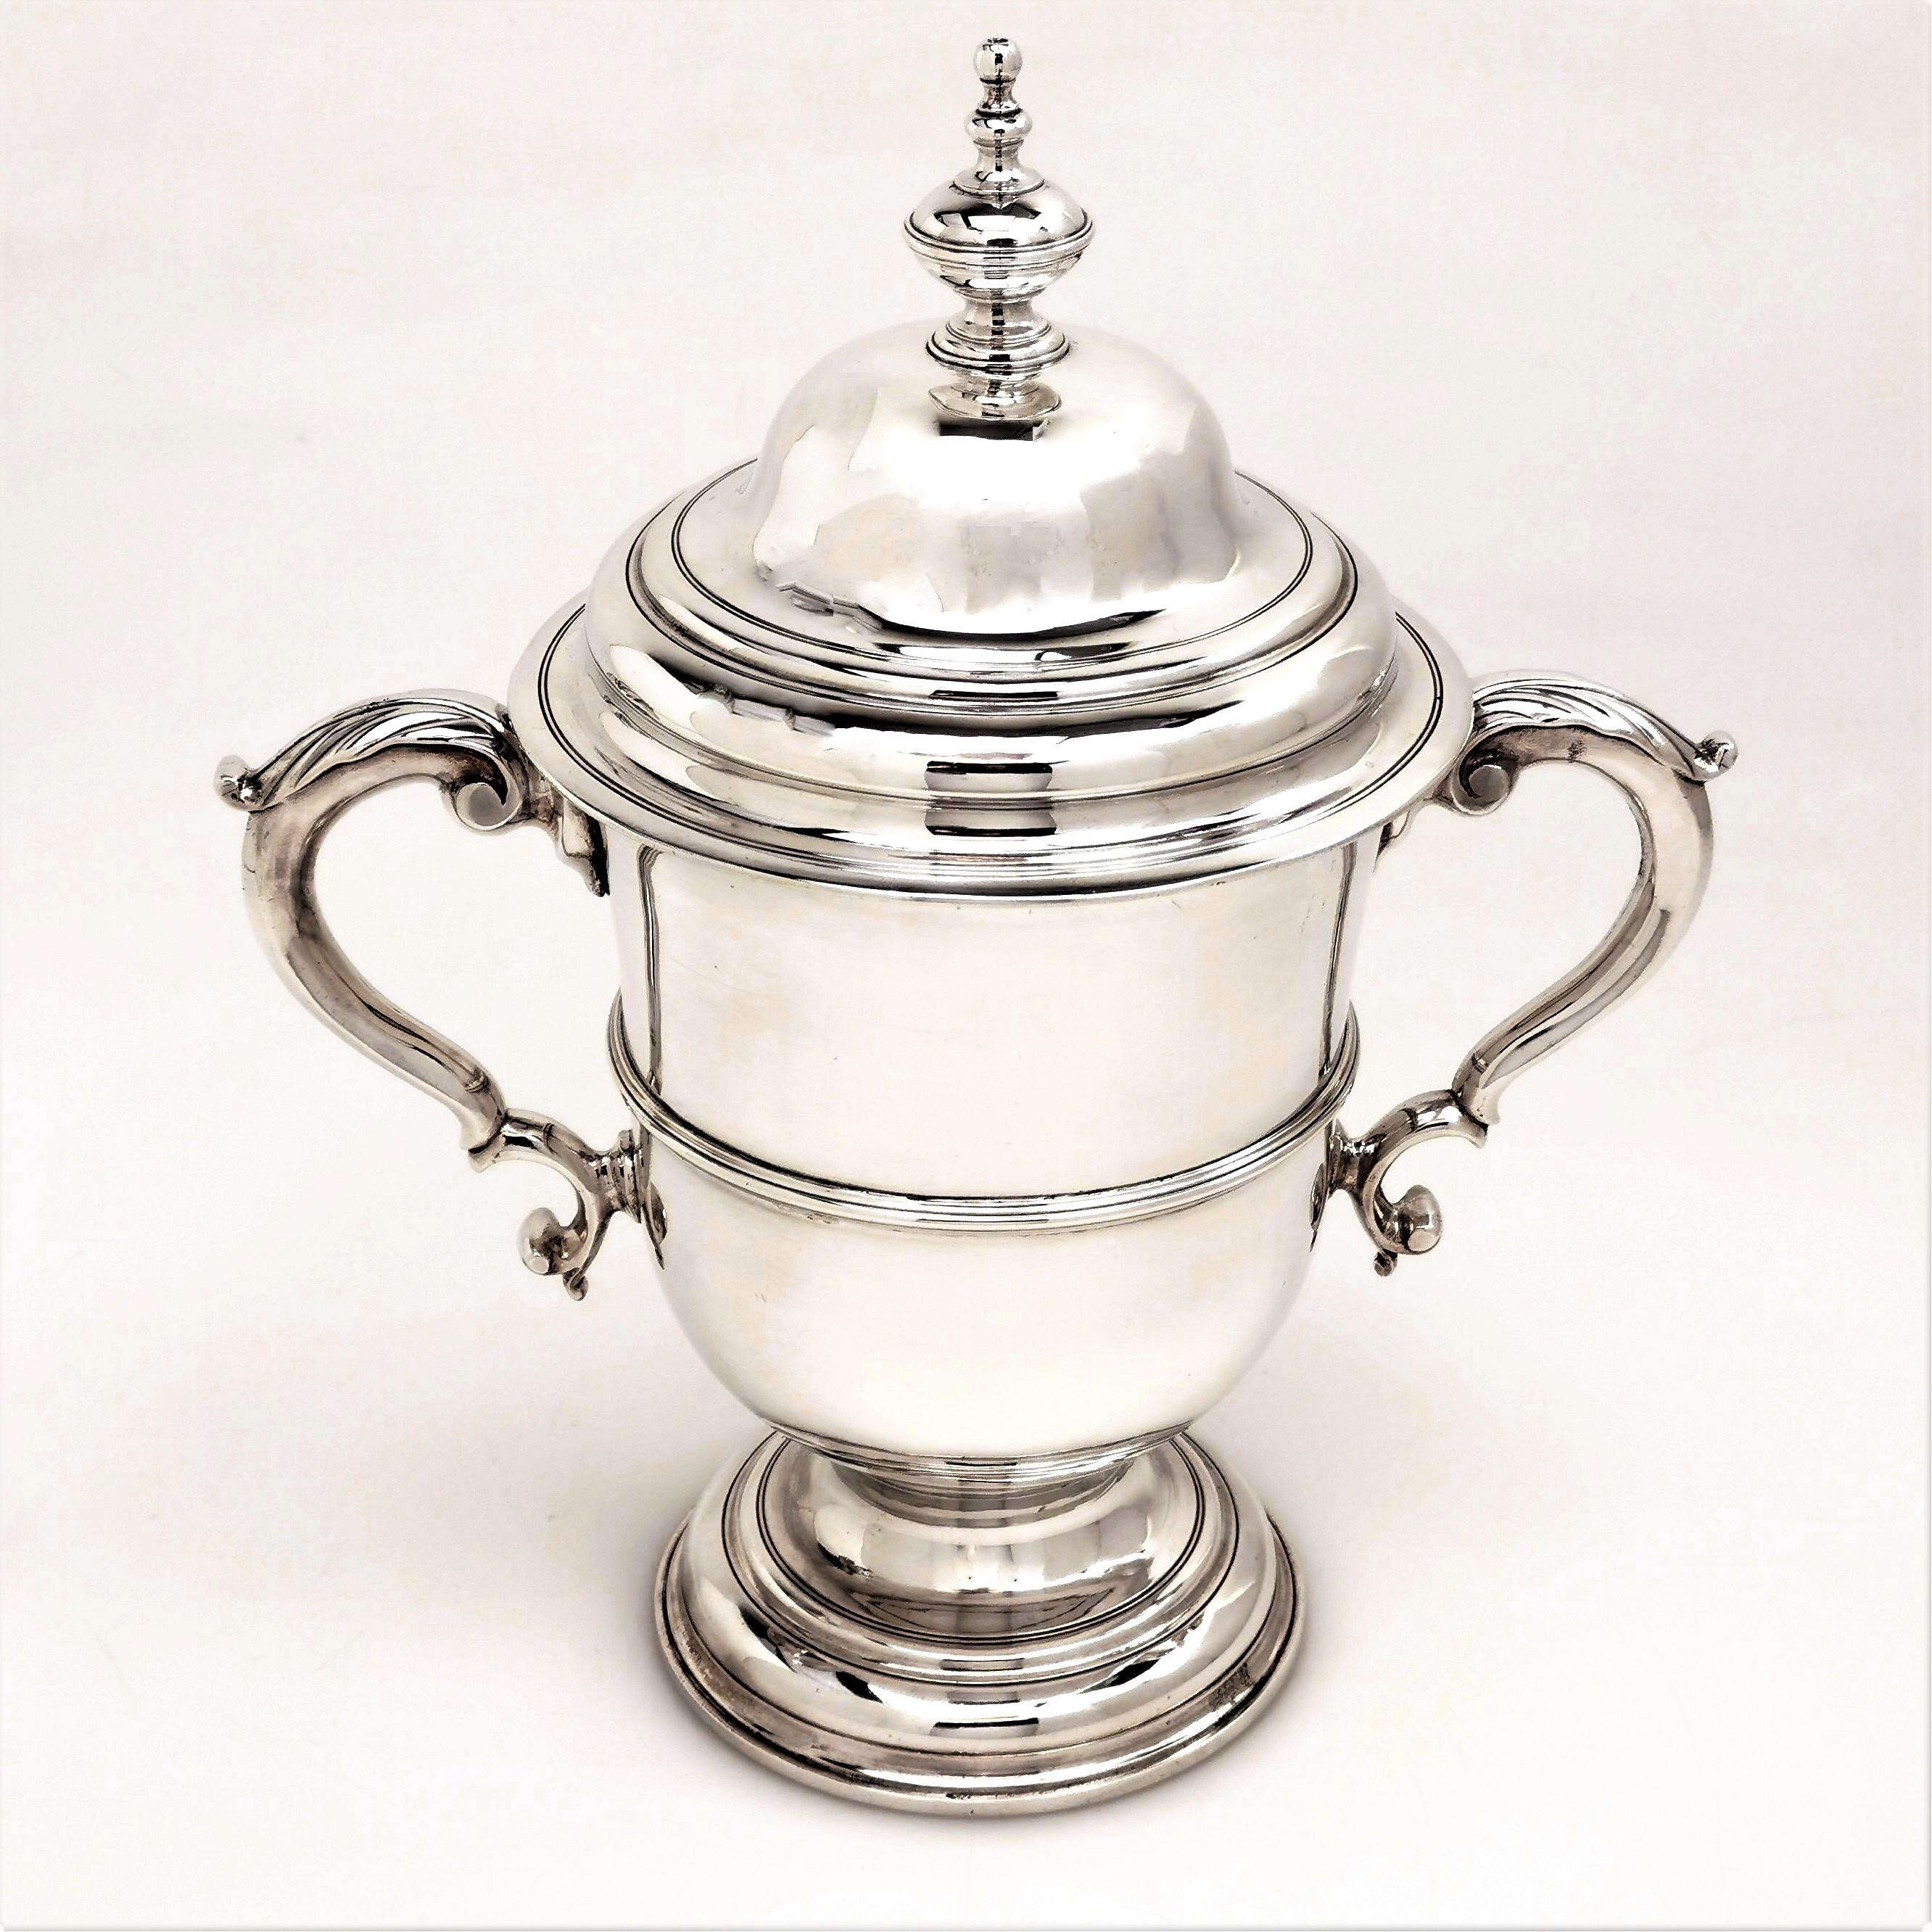 A beautiful antique George II two handled cup and cover in a Classic Georgian Style. The cup has two impressive acanthus leaf topped scroll handles and stands on a spread pedestal foot. The body of the trophy has a central band and a large armorial